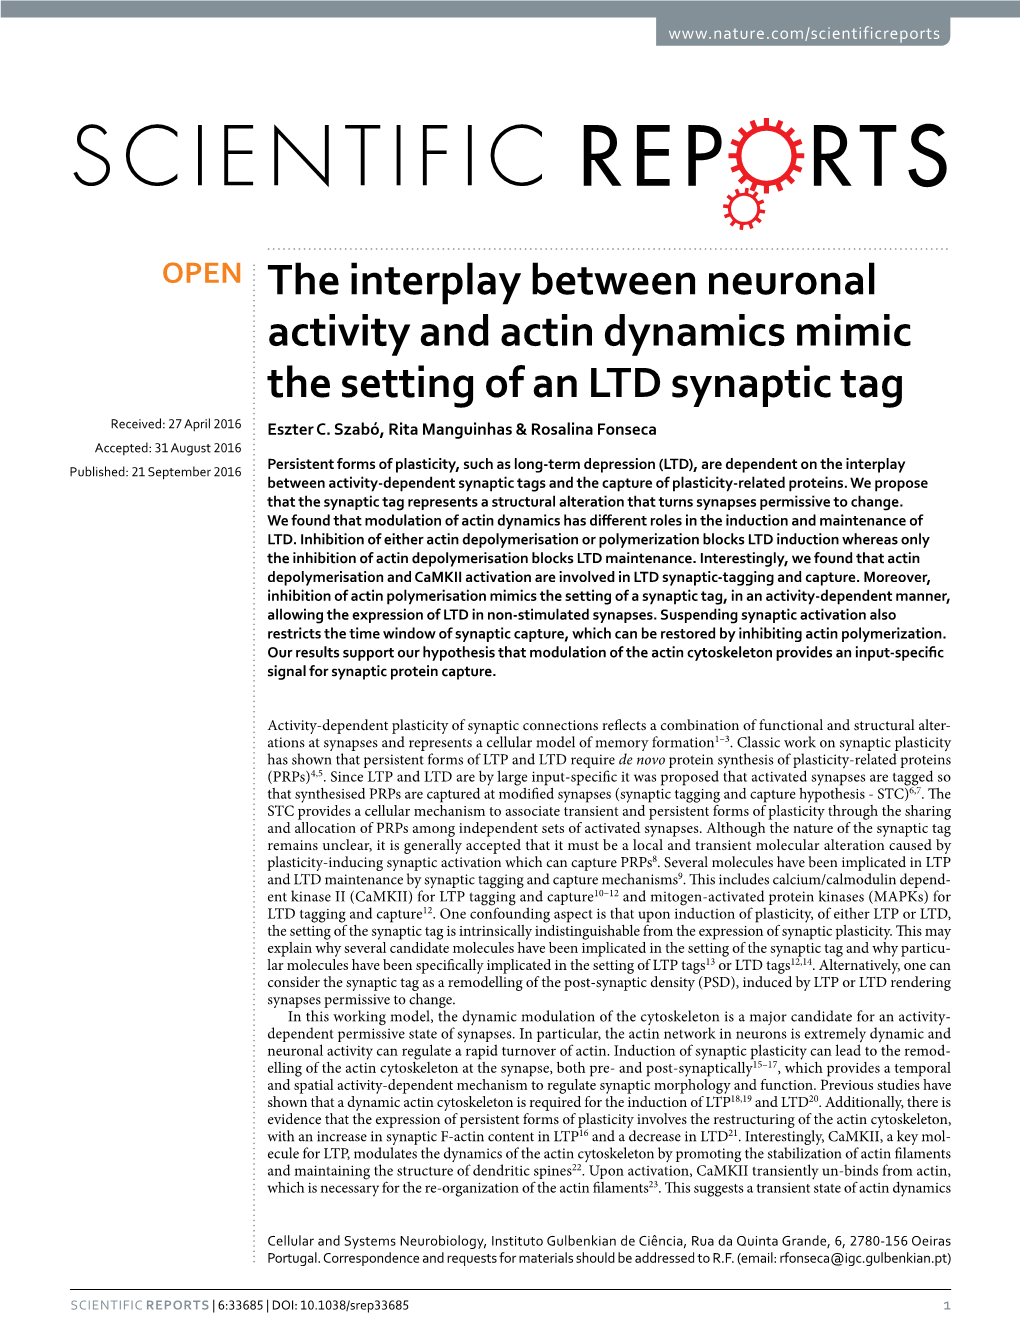 The Interplay Between Neuronal Activity and Actin Dynamics Mimic the Setting of an LTD Synaptic Tag Received: 27 April 2016 Eszter C